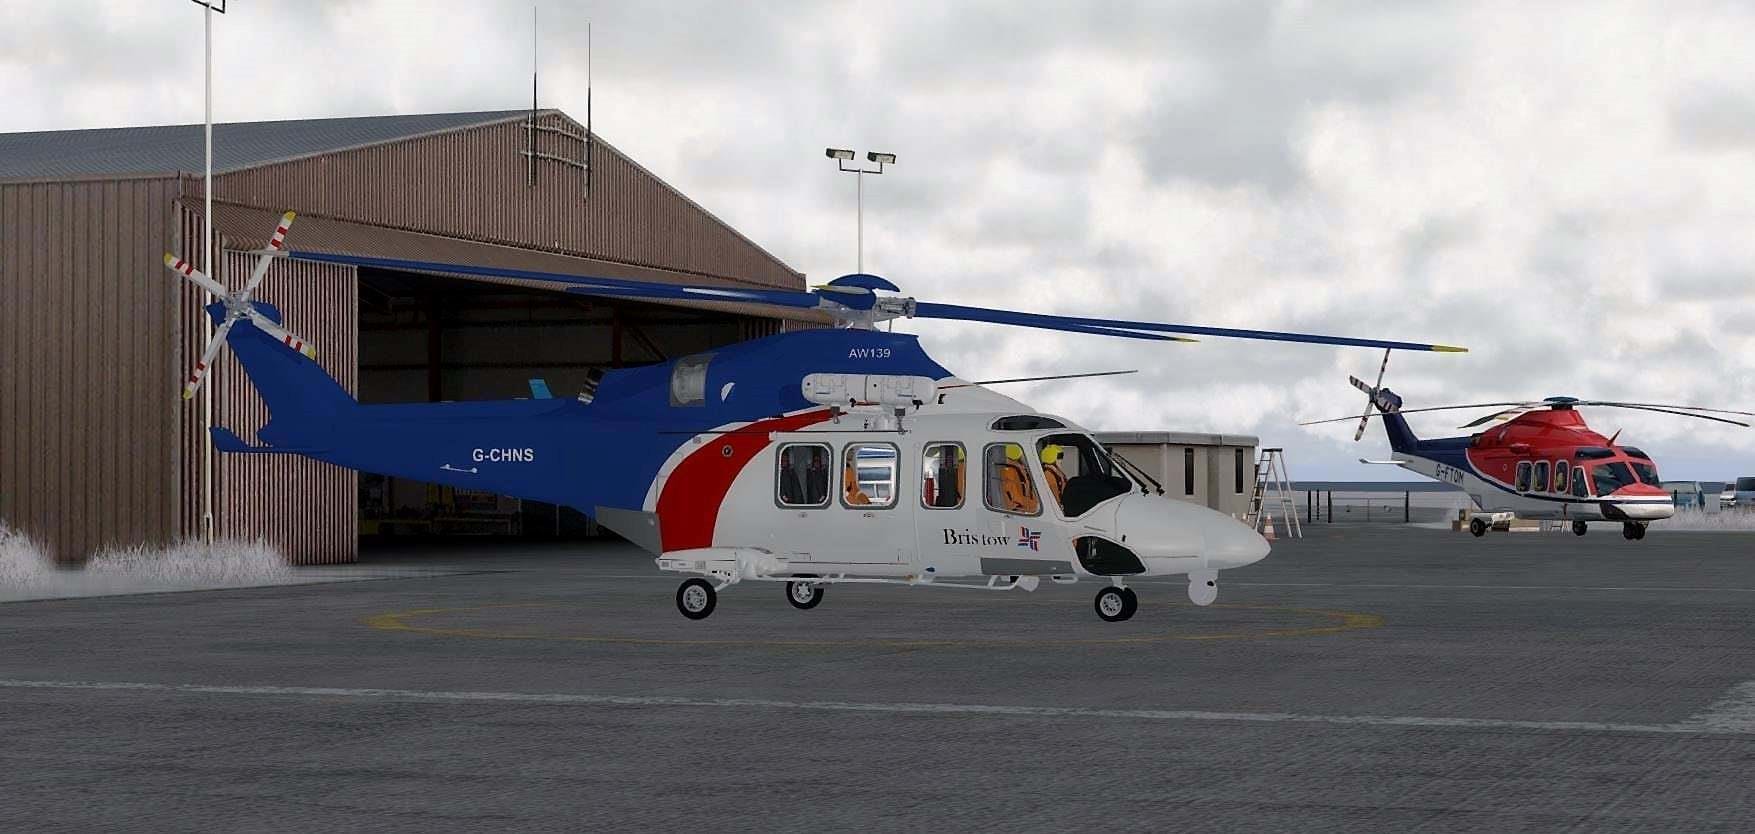 AW139 repaint - Bristow